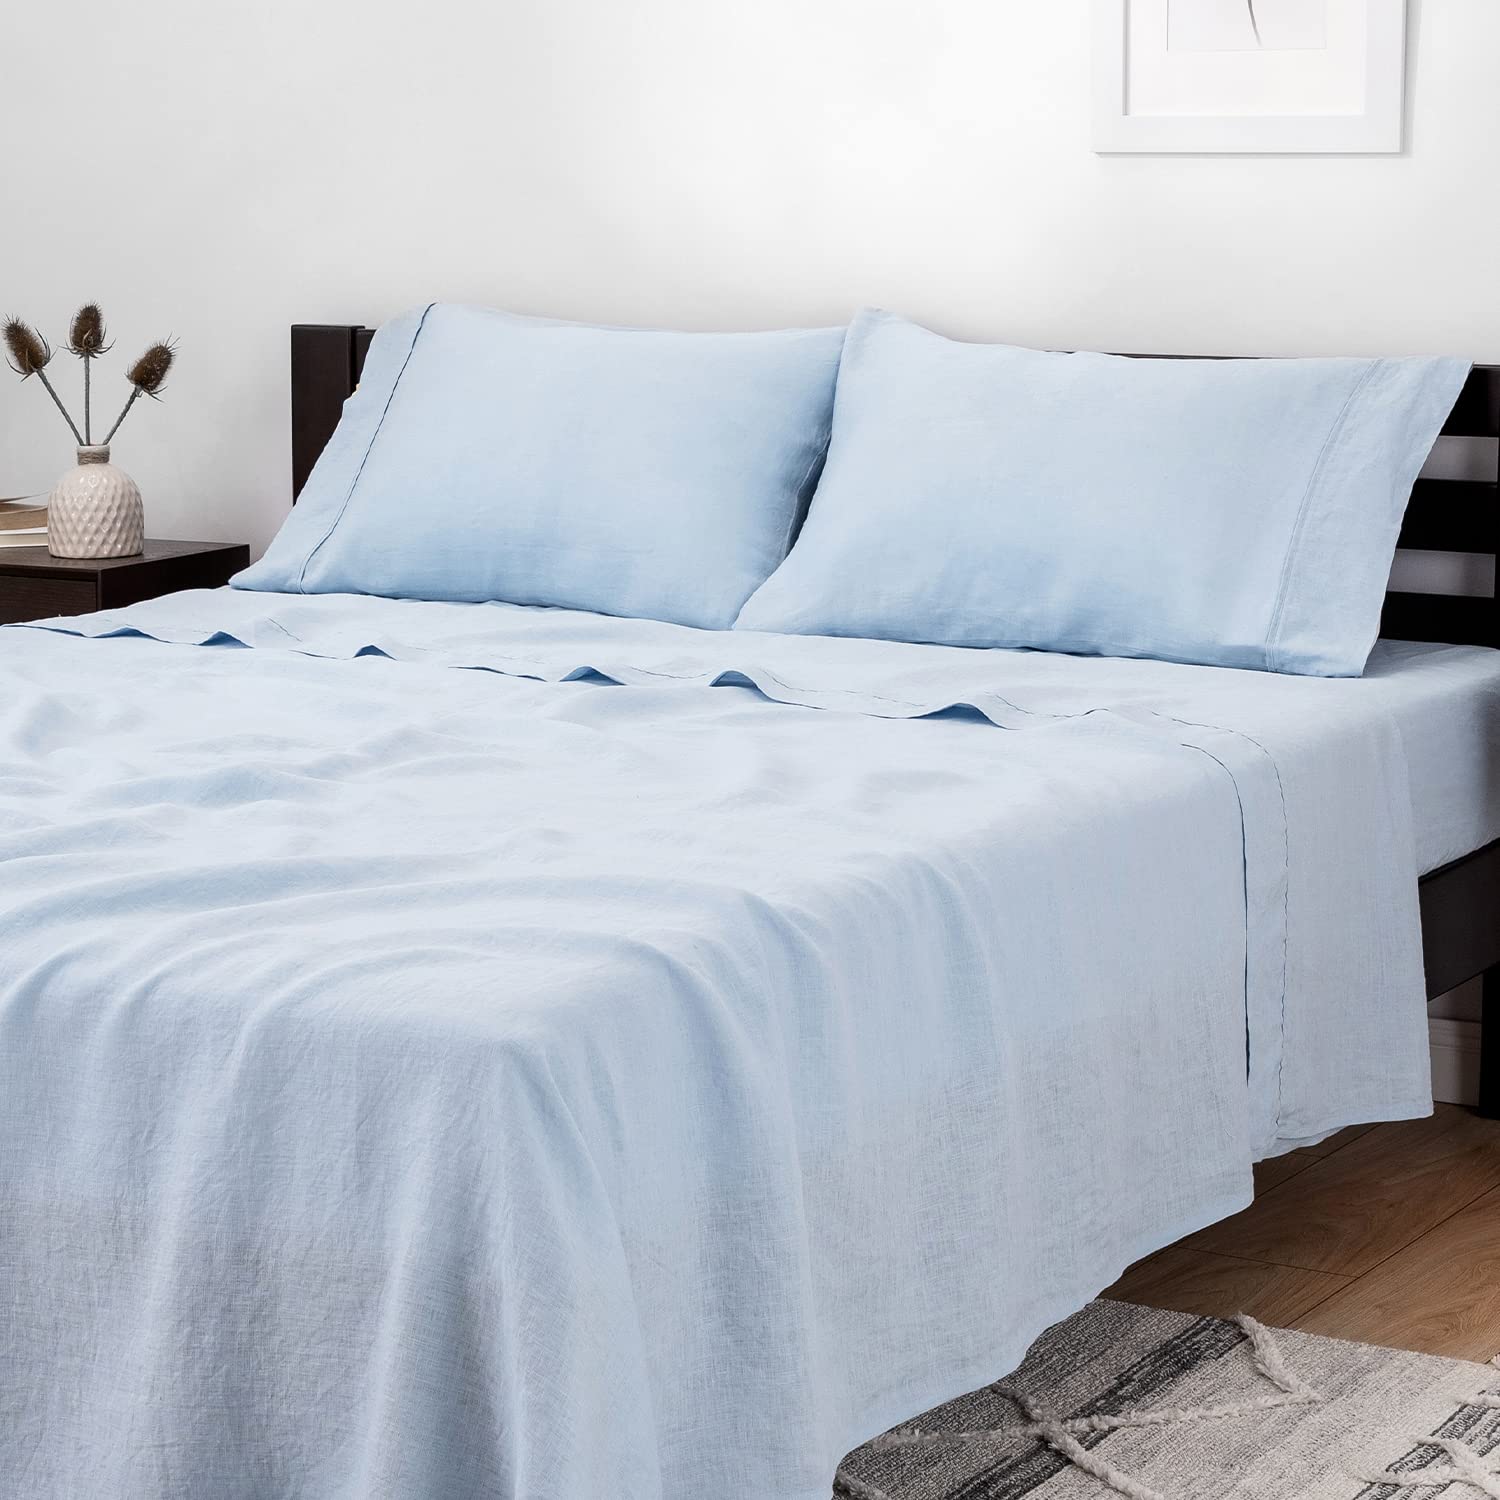 Book Cover Mellanni 100% Linen Sheets King Size - Blue Sheets Linen Set - Includes King Fitted Sheet Deep Pocket, Flat Sheet and 2 Pillow Cases - Lightweight, Breathable and Durable (King, Blue) King Blue